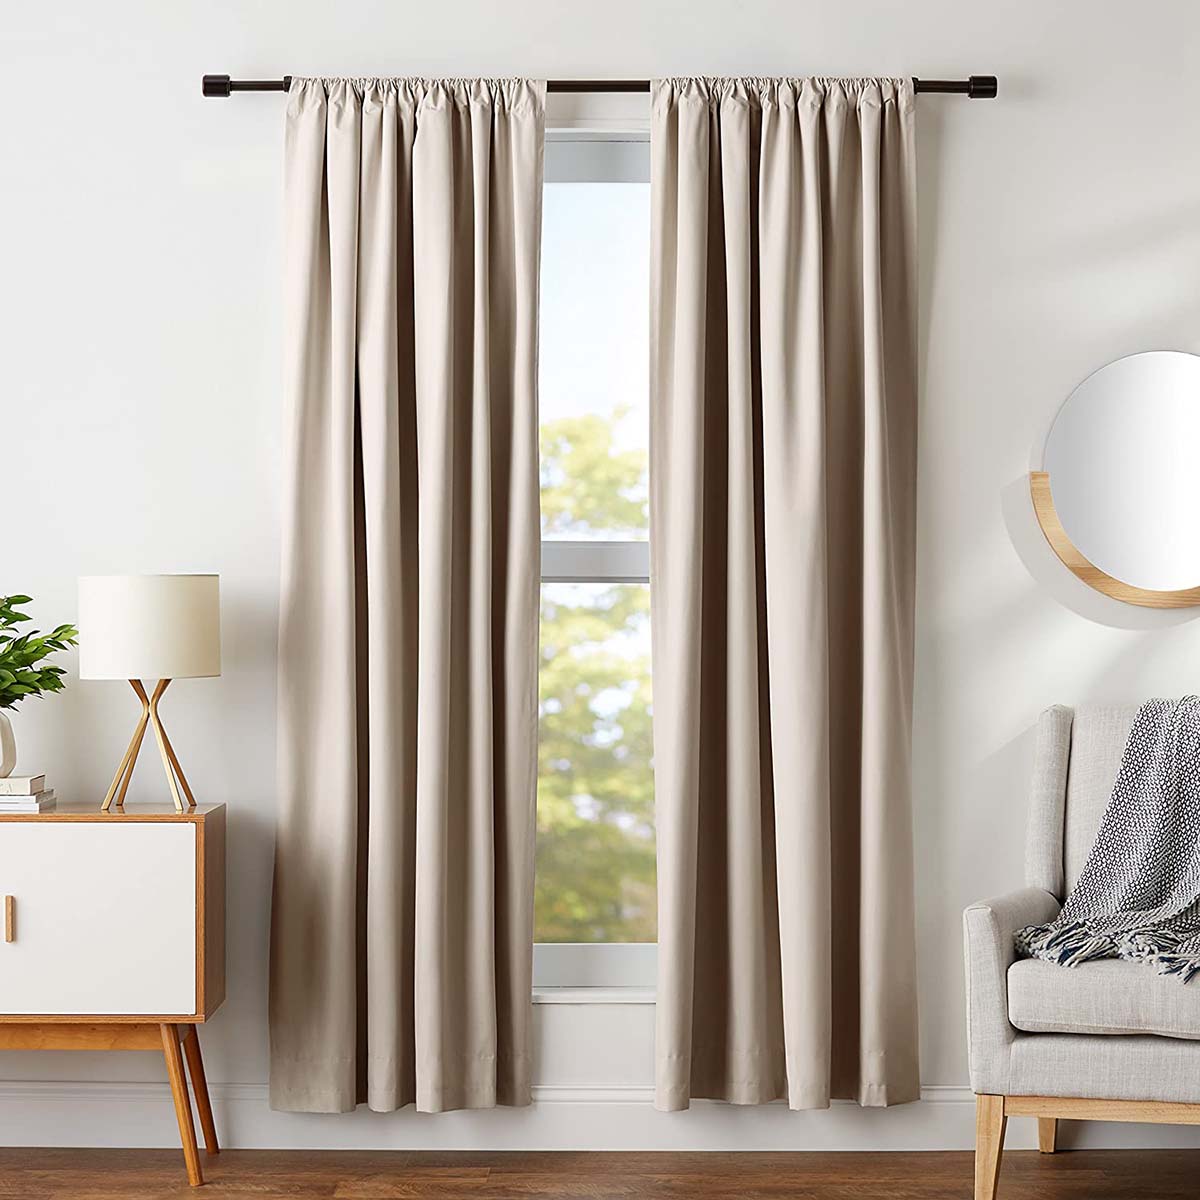 Essentials to Help You Sleep Cooler Option Insulated Blackout Curtains